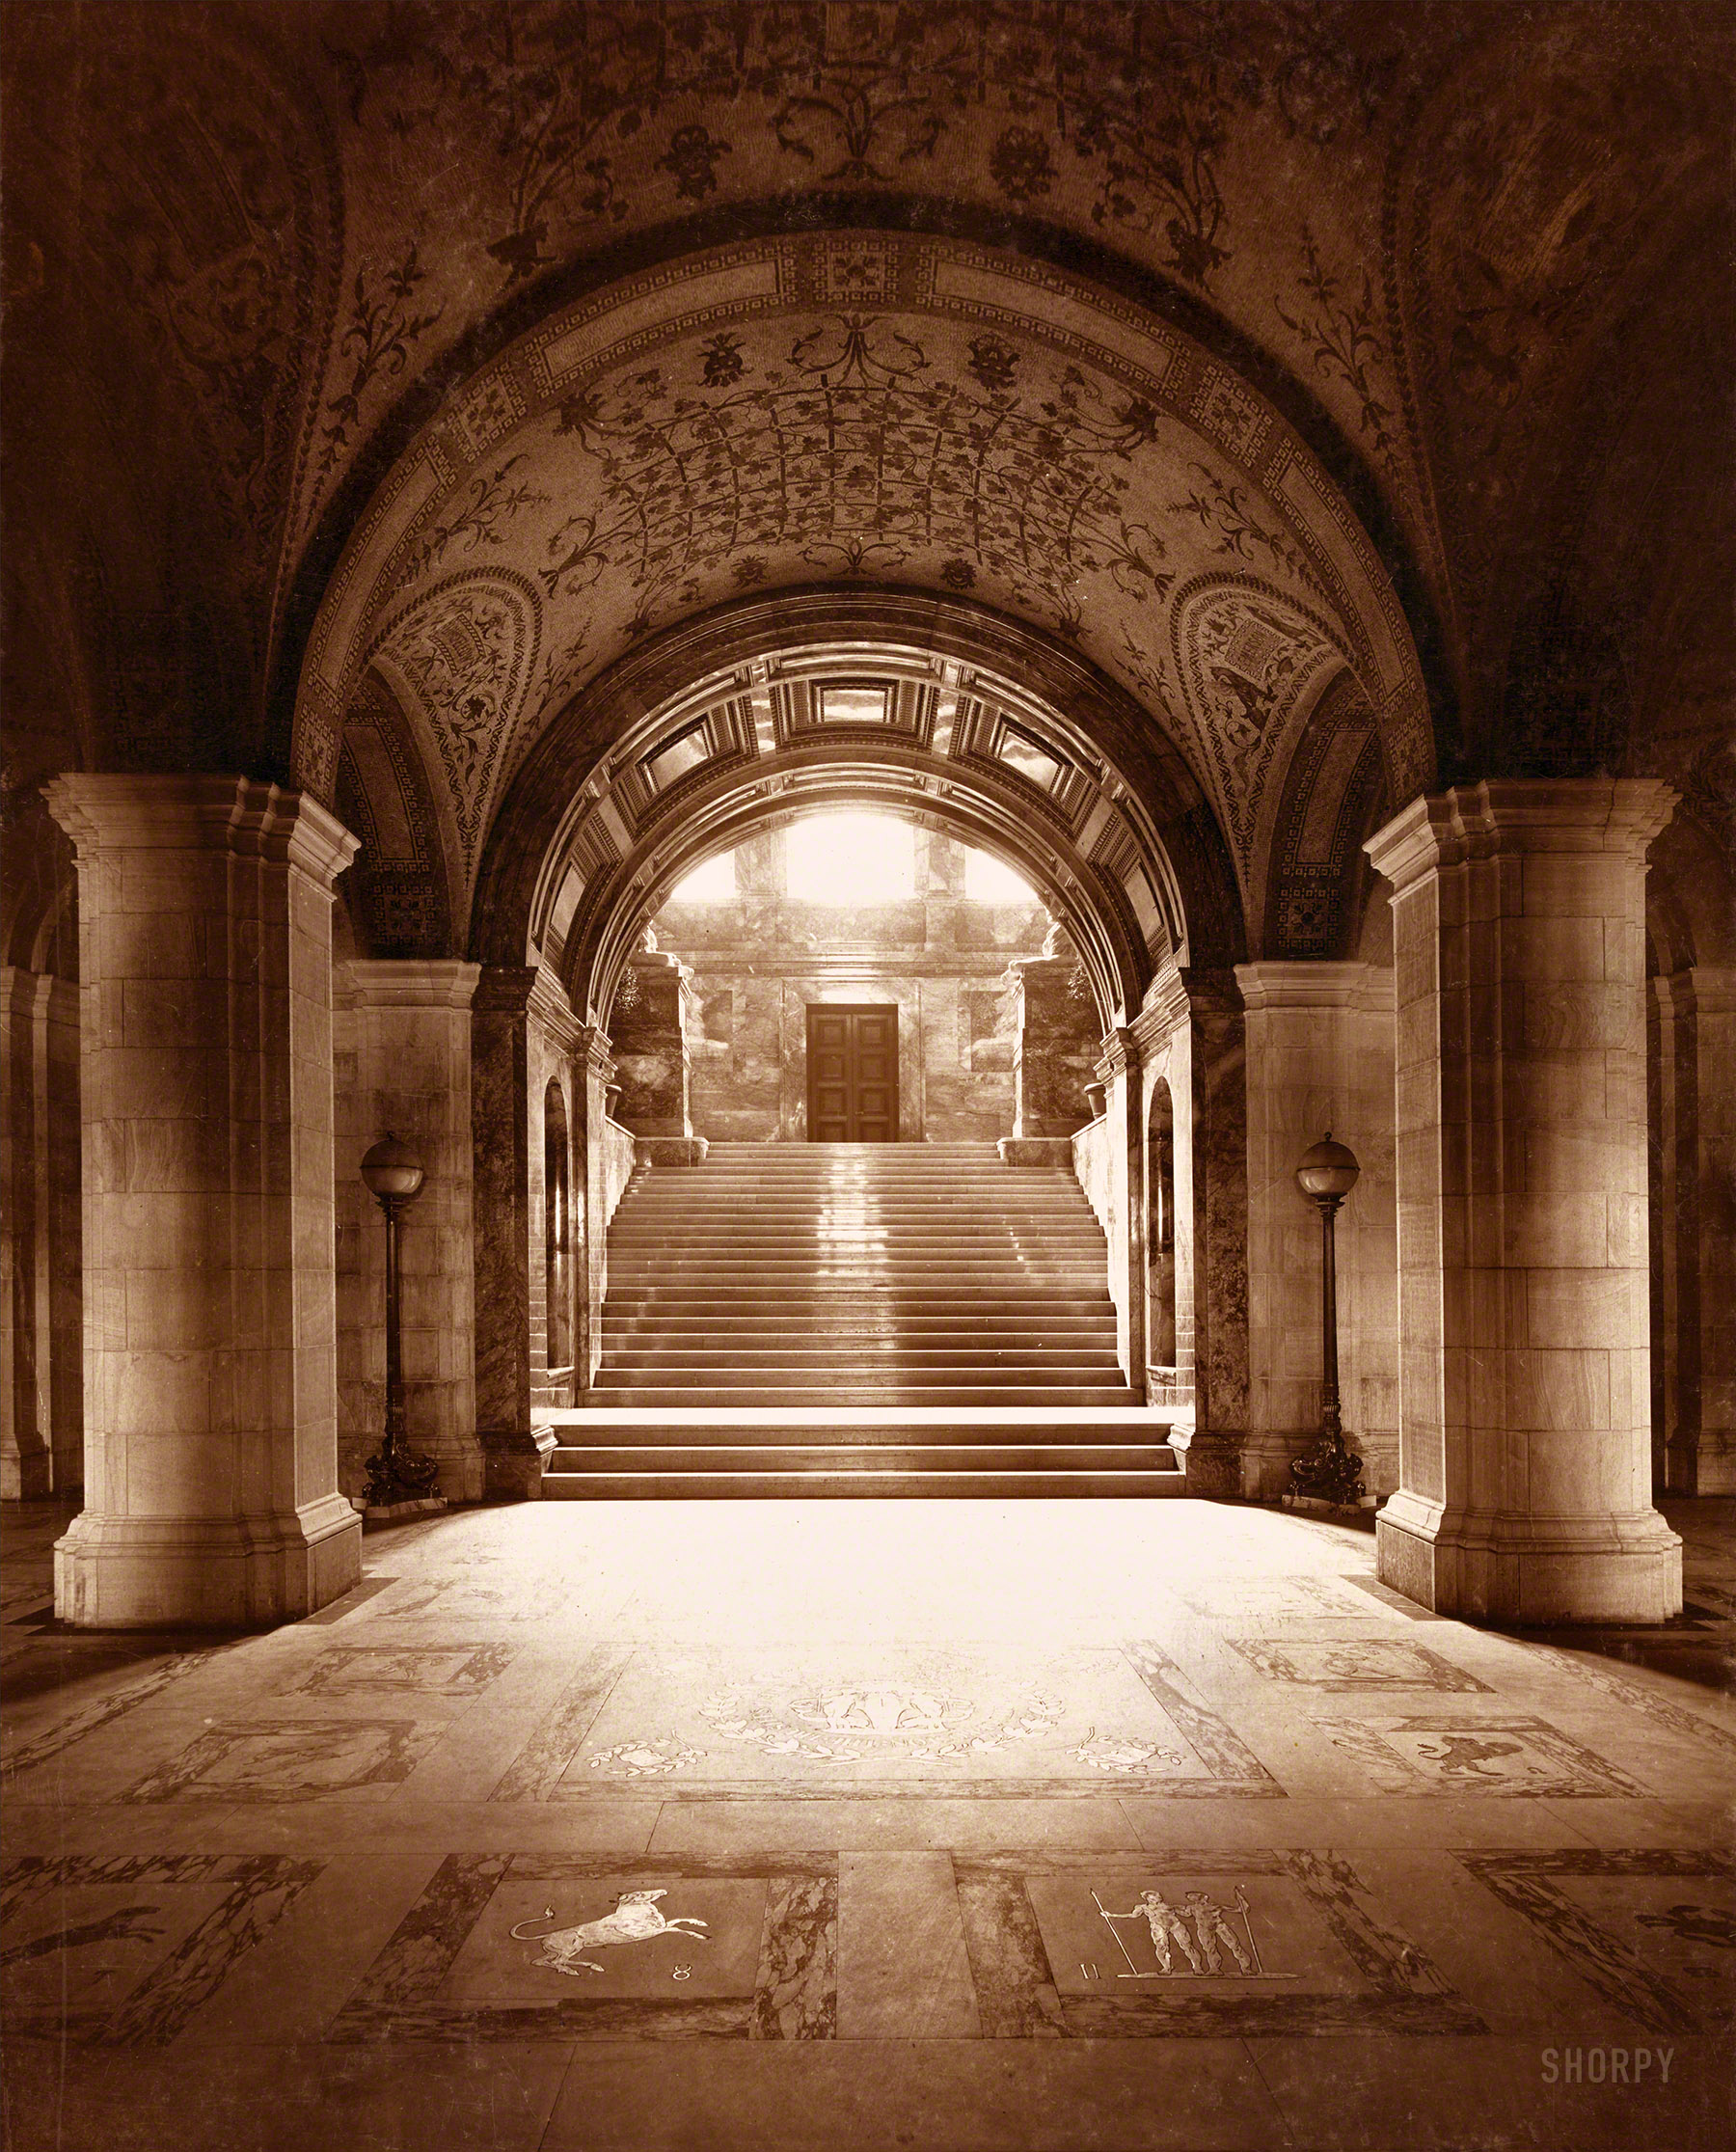 Boston, Massachusetts, circa 1895. "Main entrance, Boston Public Library." Red all over. Photo by Charles Pollock. View full size.